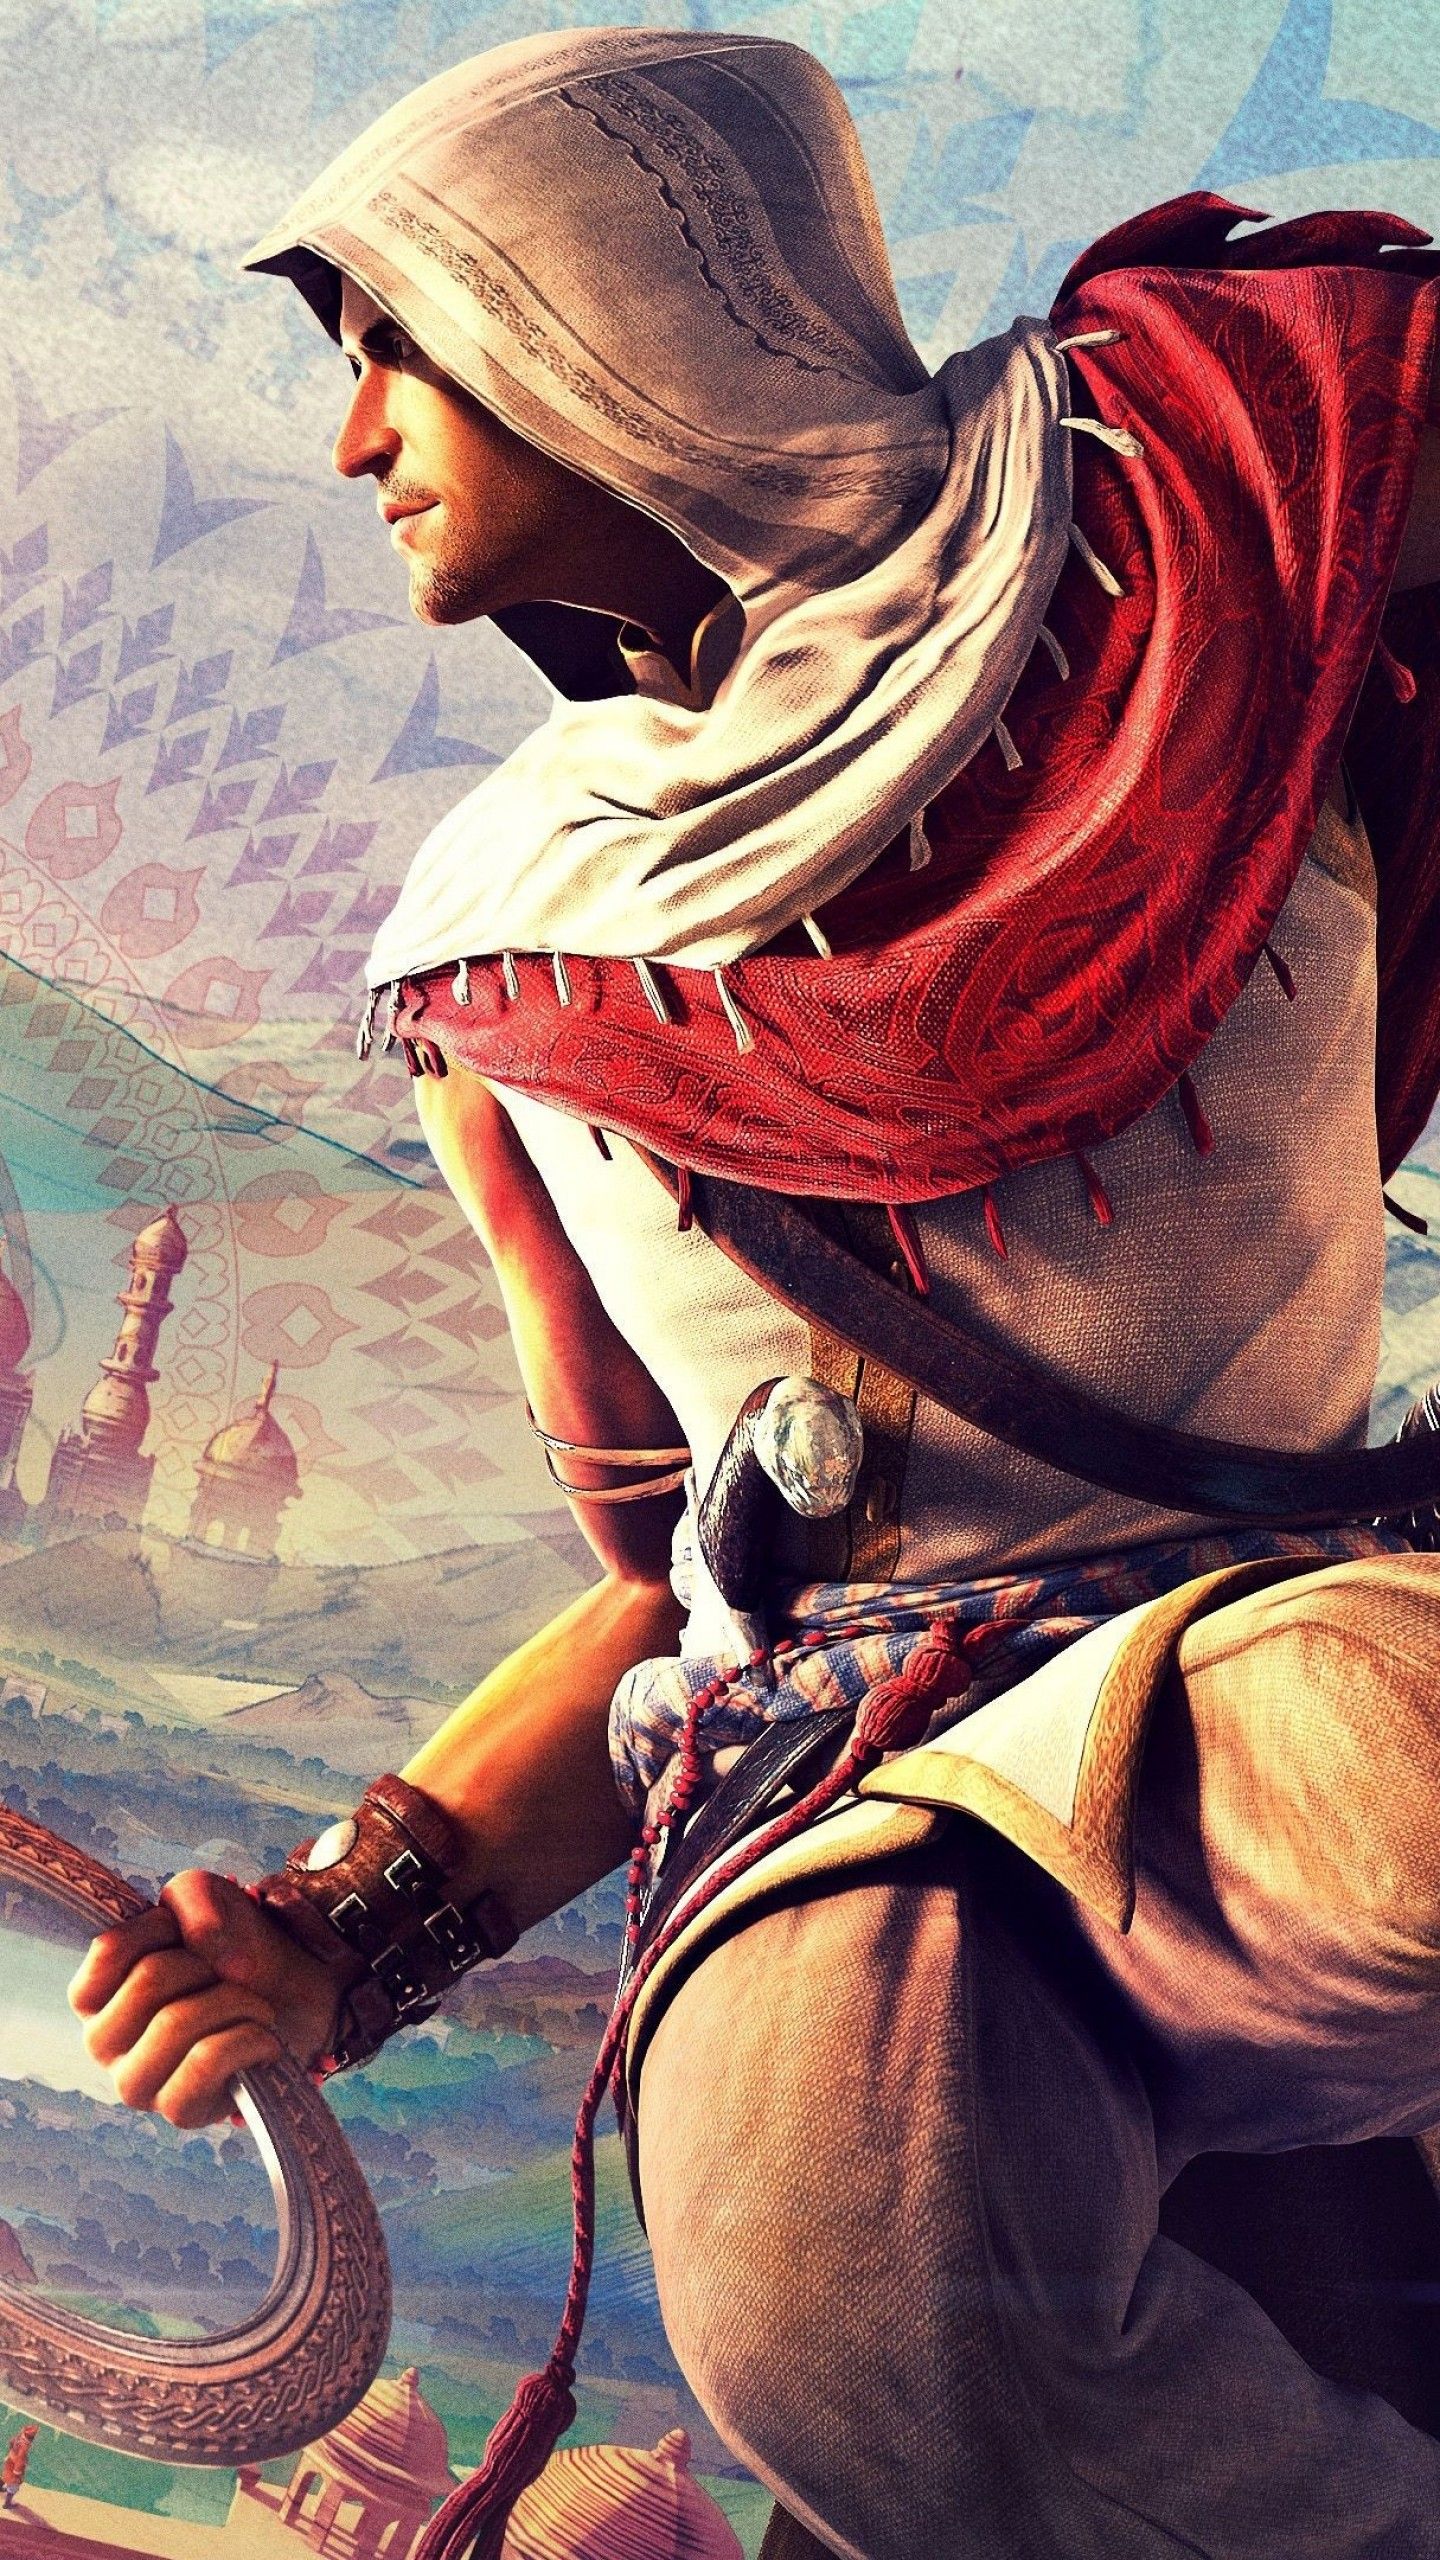 Wallpaper Assassin's Creed Chronicles Trilogy, Best Games, Game, Arcade, Sci Fi, India, PC, PS Xbox One, Games